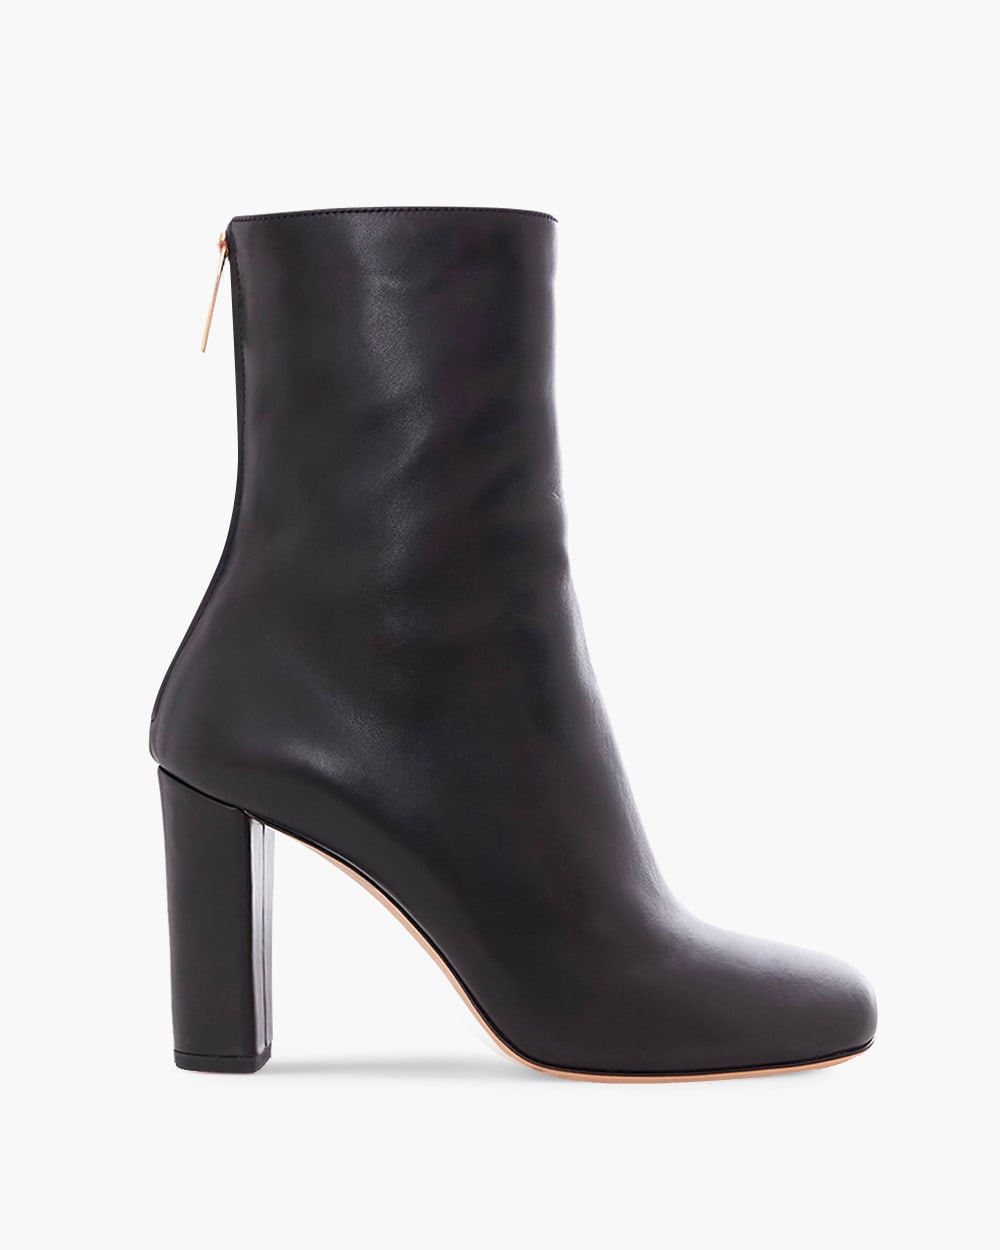 Paris Texas Squared Toe Ankle Boots